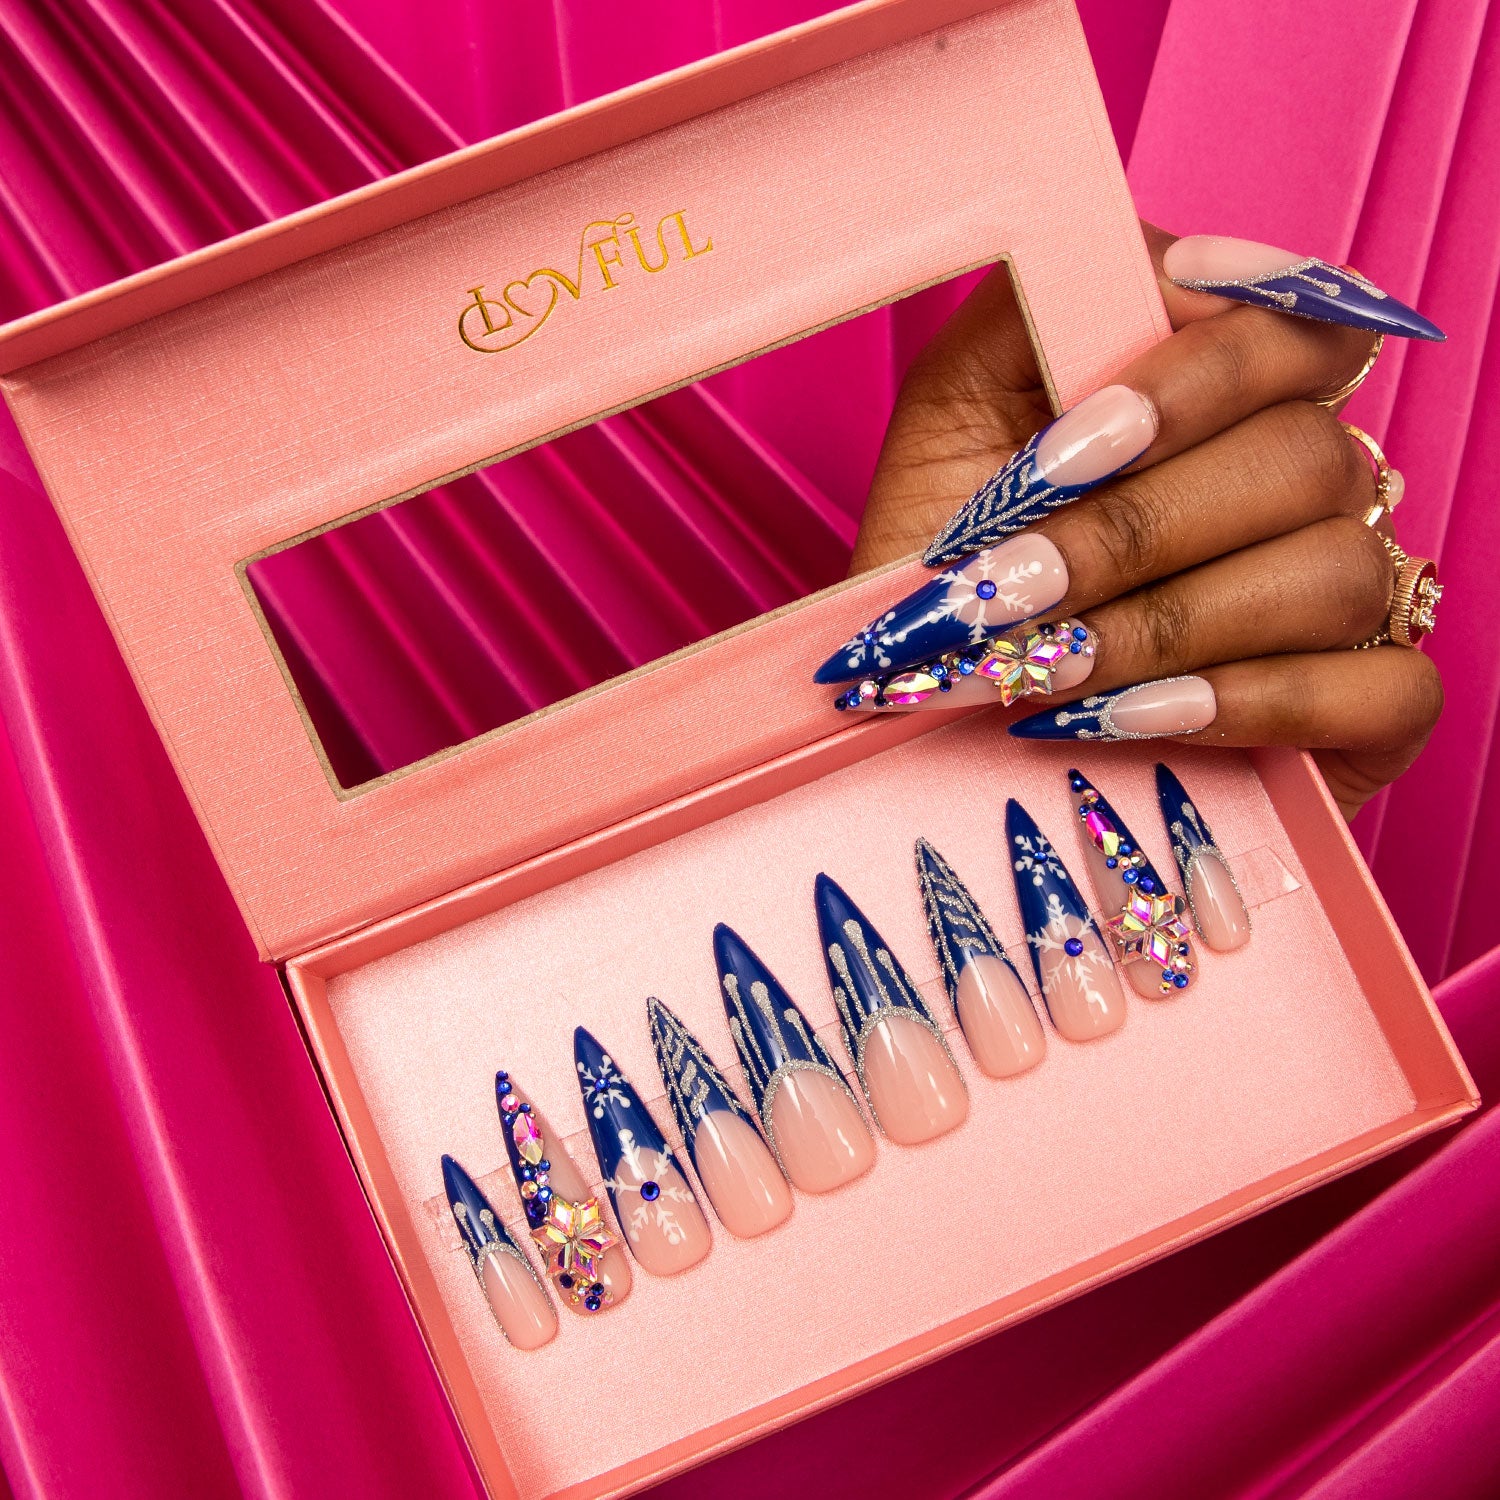 Lovful Snow Waltz press-on nails with blue French tips and white snowflakes, displayed in a pink box, against a vibrant pink background.